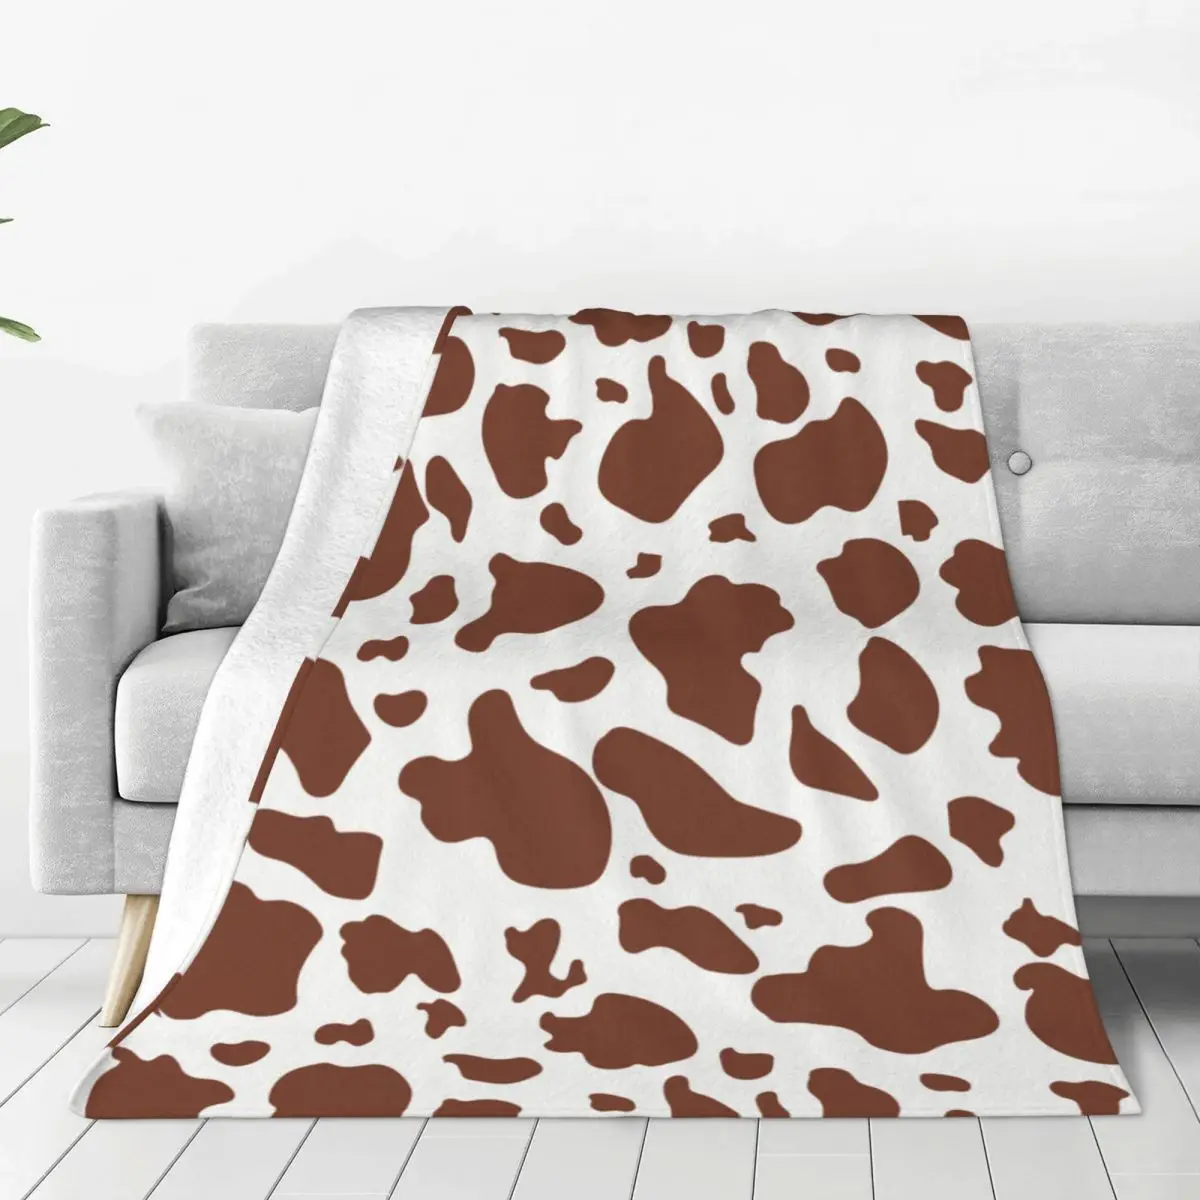 Cow Pattern Blanket Fleece Summer Texture Multifunction Super Soft Throw Blankets for Bed Travel Bedspreads